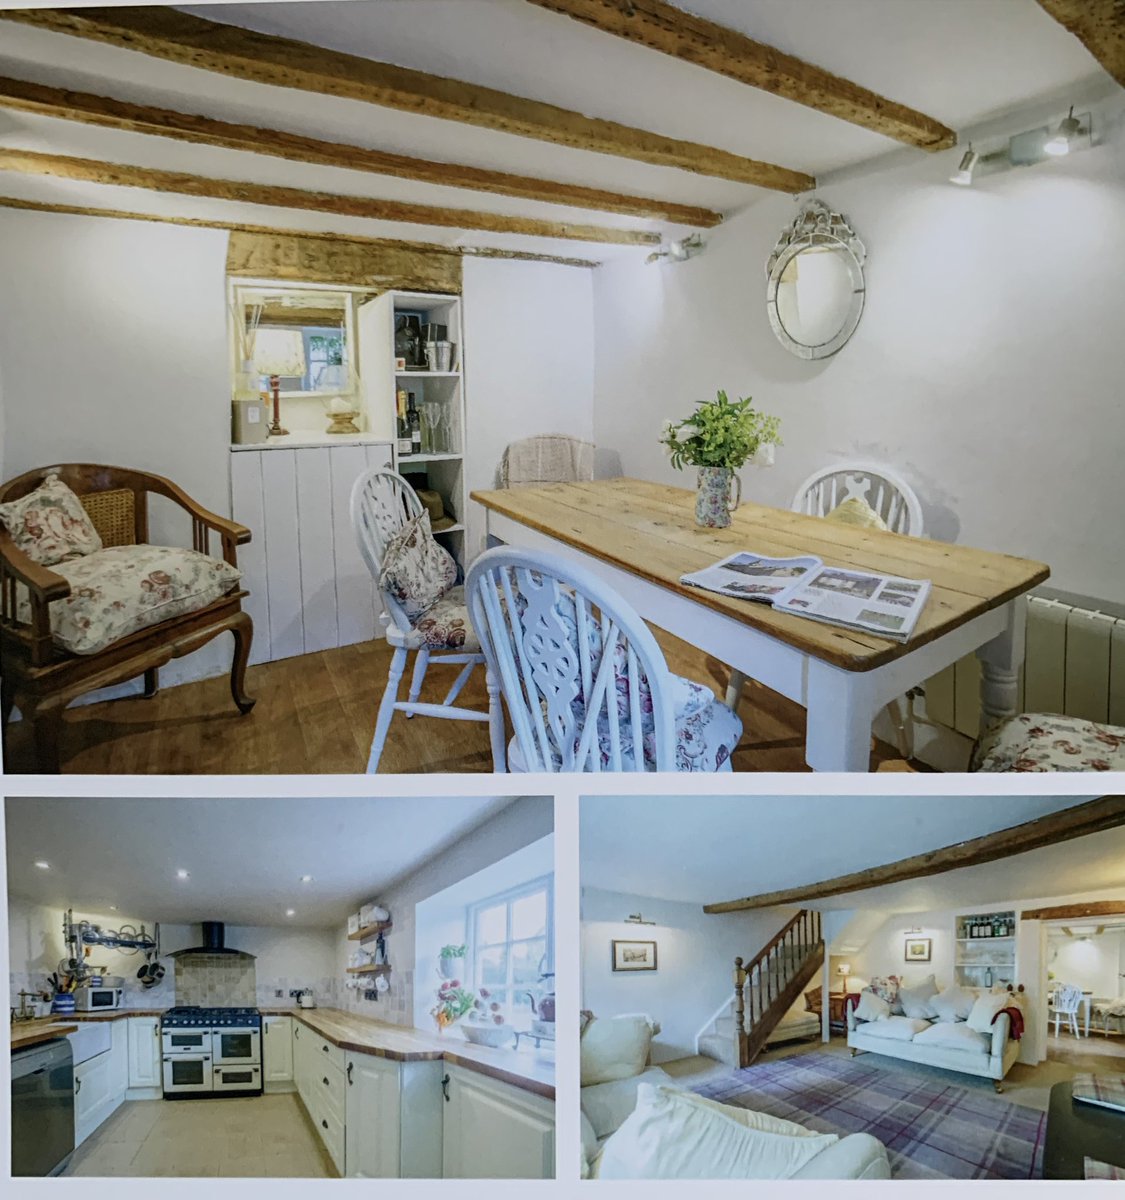 search.savills.com/property-detai… Are you ready to move to the country? Here’s your chance to grab a totally unique country cottage #peakdistrict #countrycottage @Savills #lifeinthecountry #countrylife @peakdistrict #countryliving